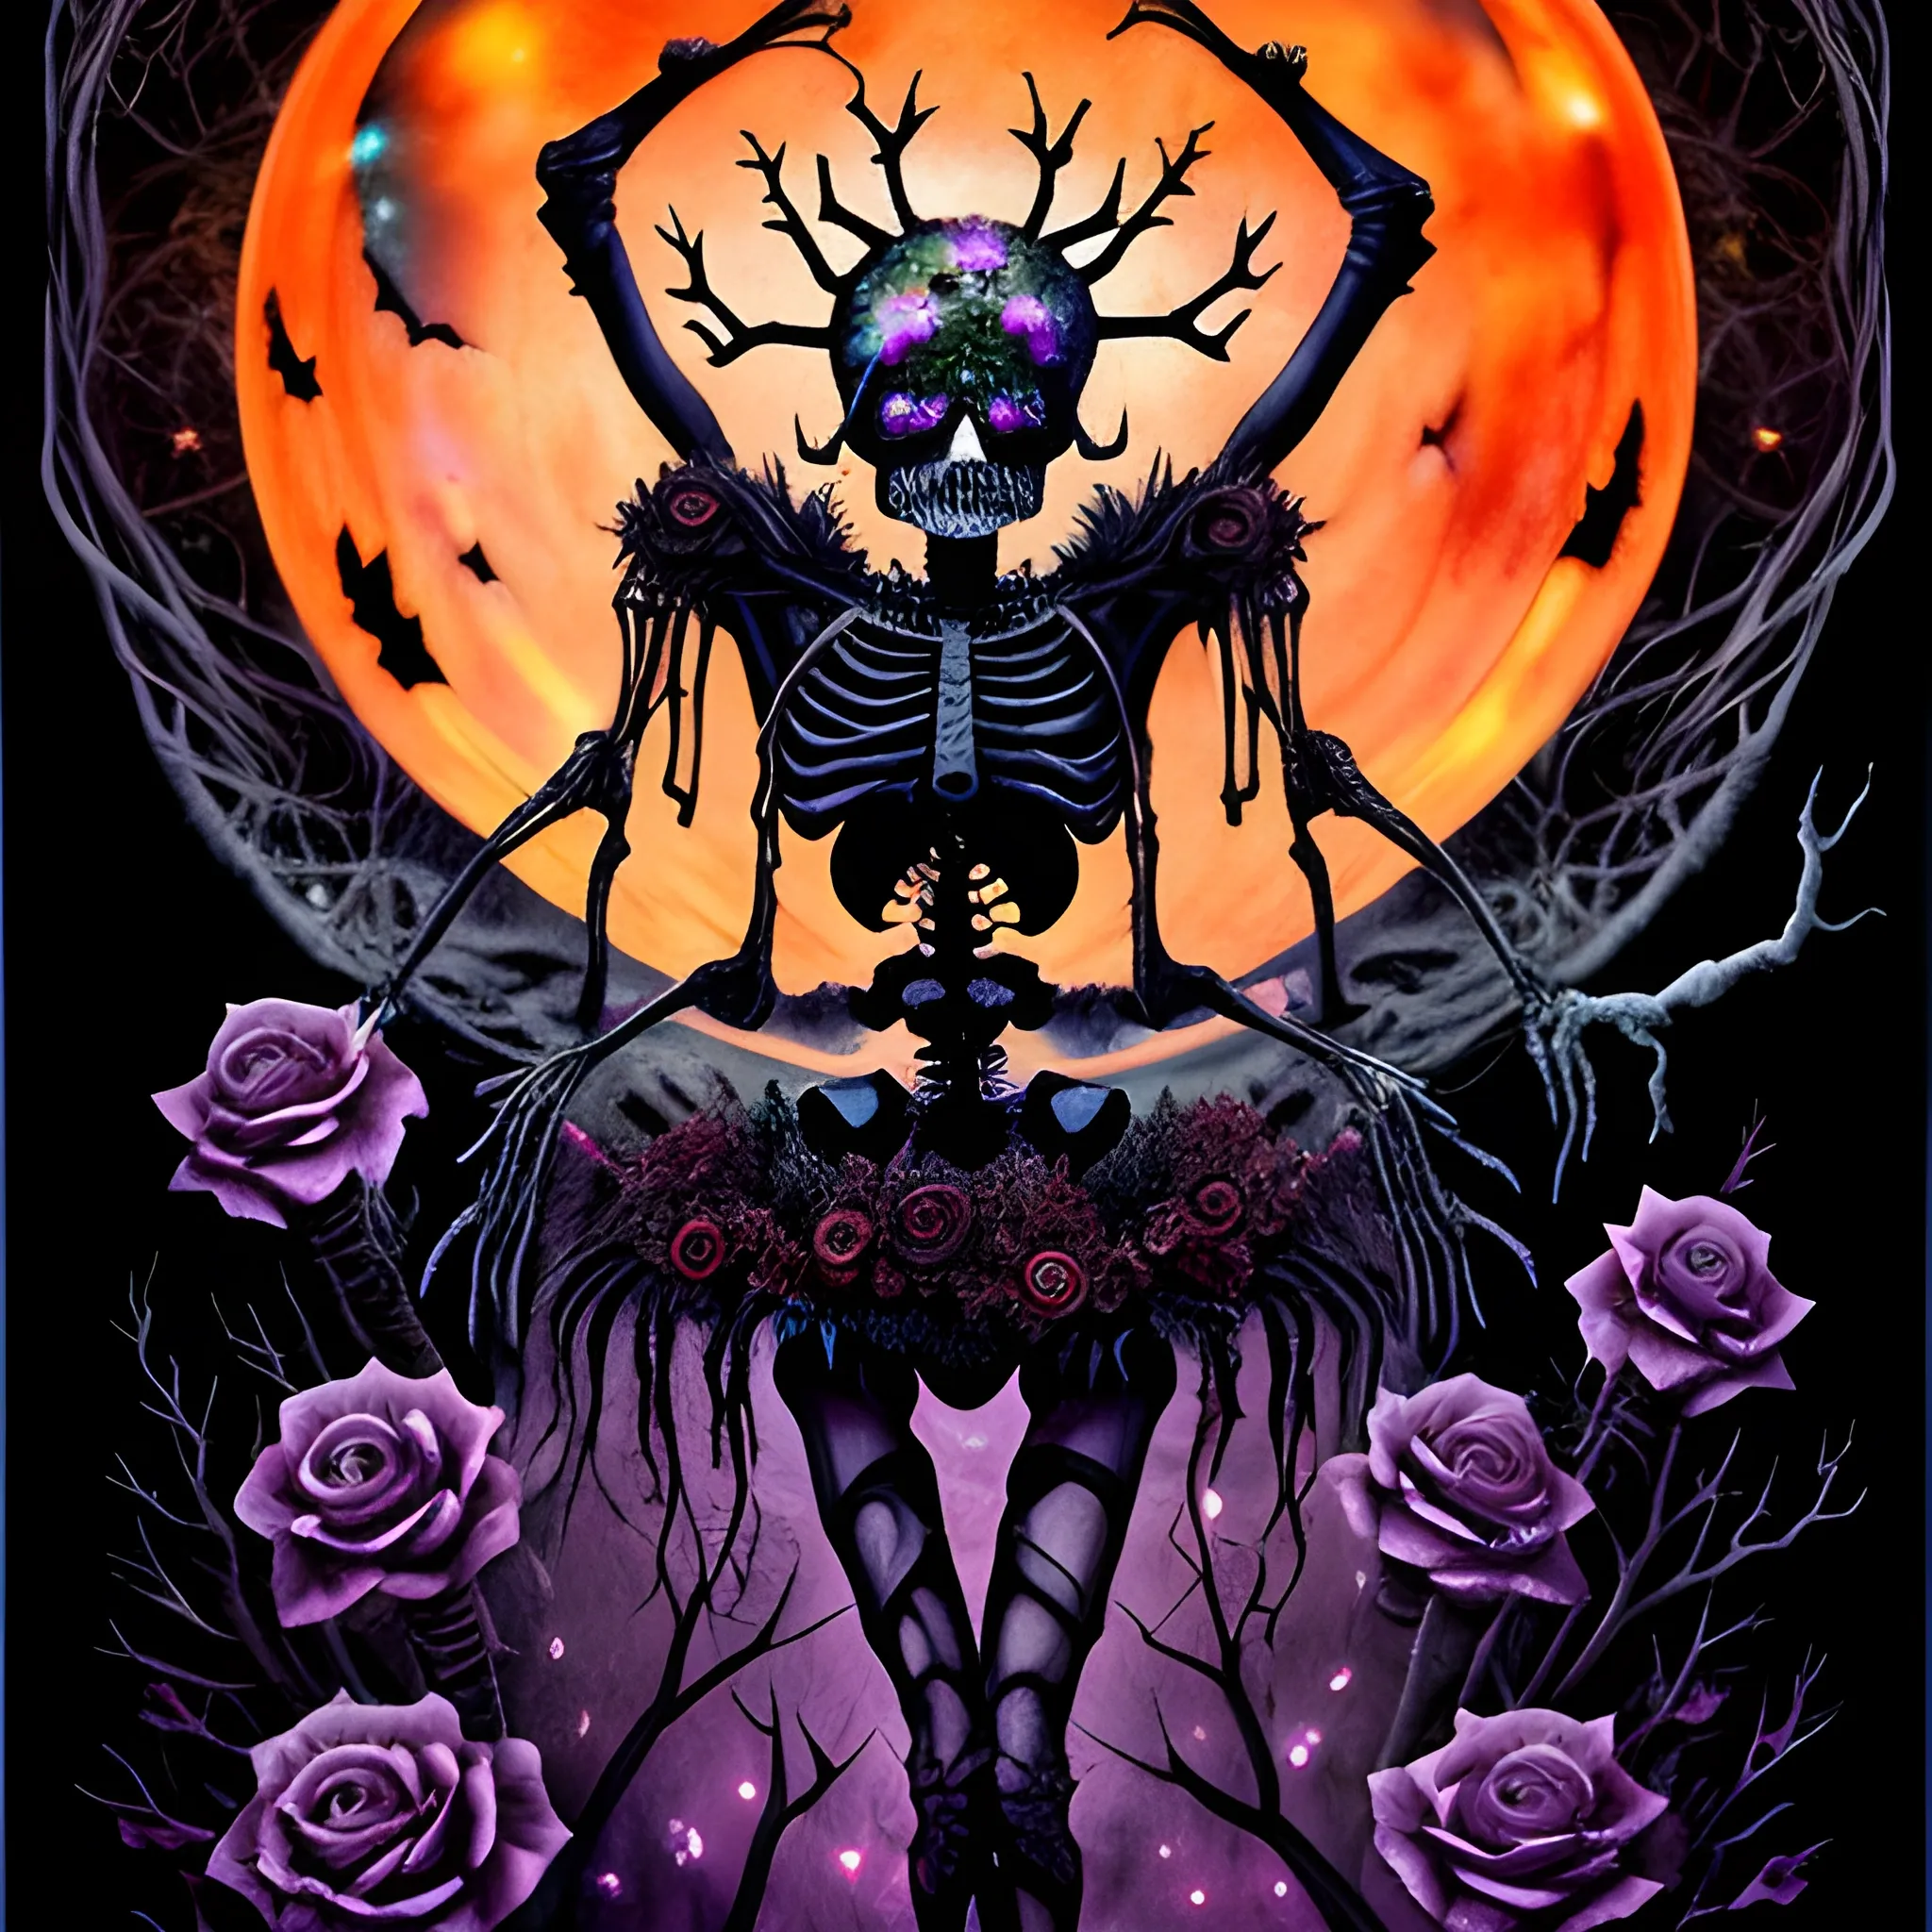 a skeleton ballerina wearing a thorny crown of black roses and weeping black tears, Halloween, pumpkins, ravens, spiders, bats, full moon in a nebula sky, watercolor, neon acrylic paint, purple, orange, green, fantastical surrealist world, in the style of Stephen Gammell, extremely detailed Zentangle style, sick, gothic, eldritch, candles, Halloween, 3D